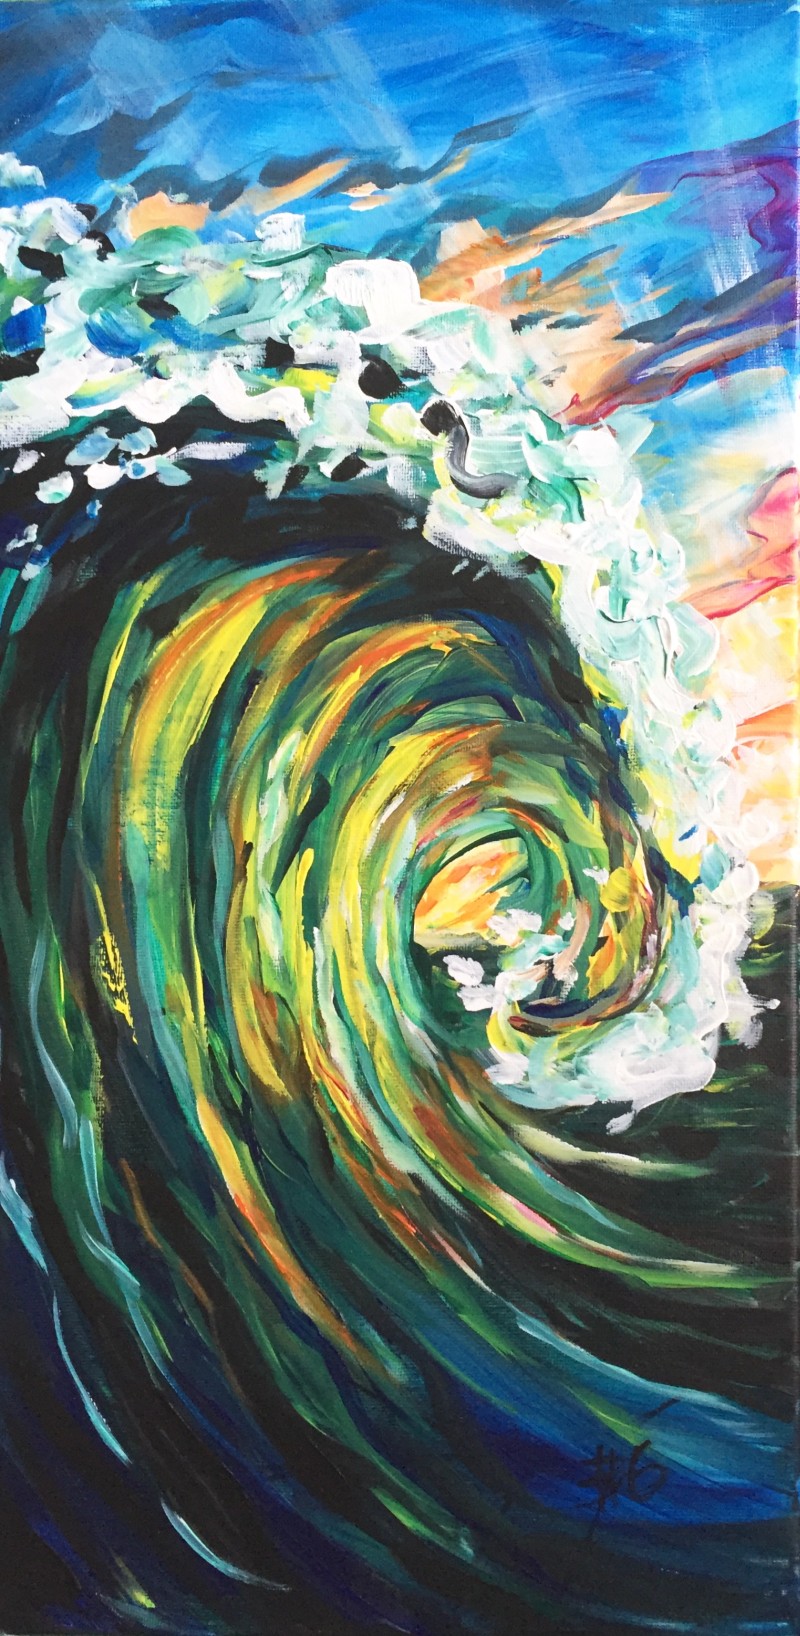 Good Morning, Let's Paint: Sunrise Wave- Includes A Cup of Coffee W/ Ticket Purchase!